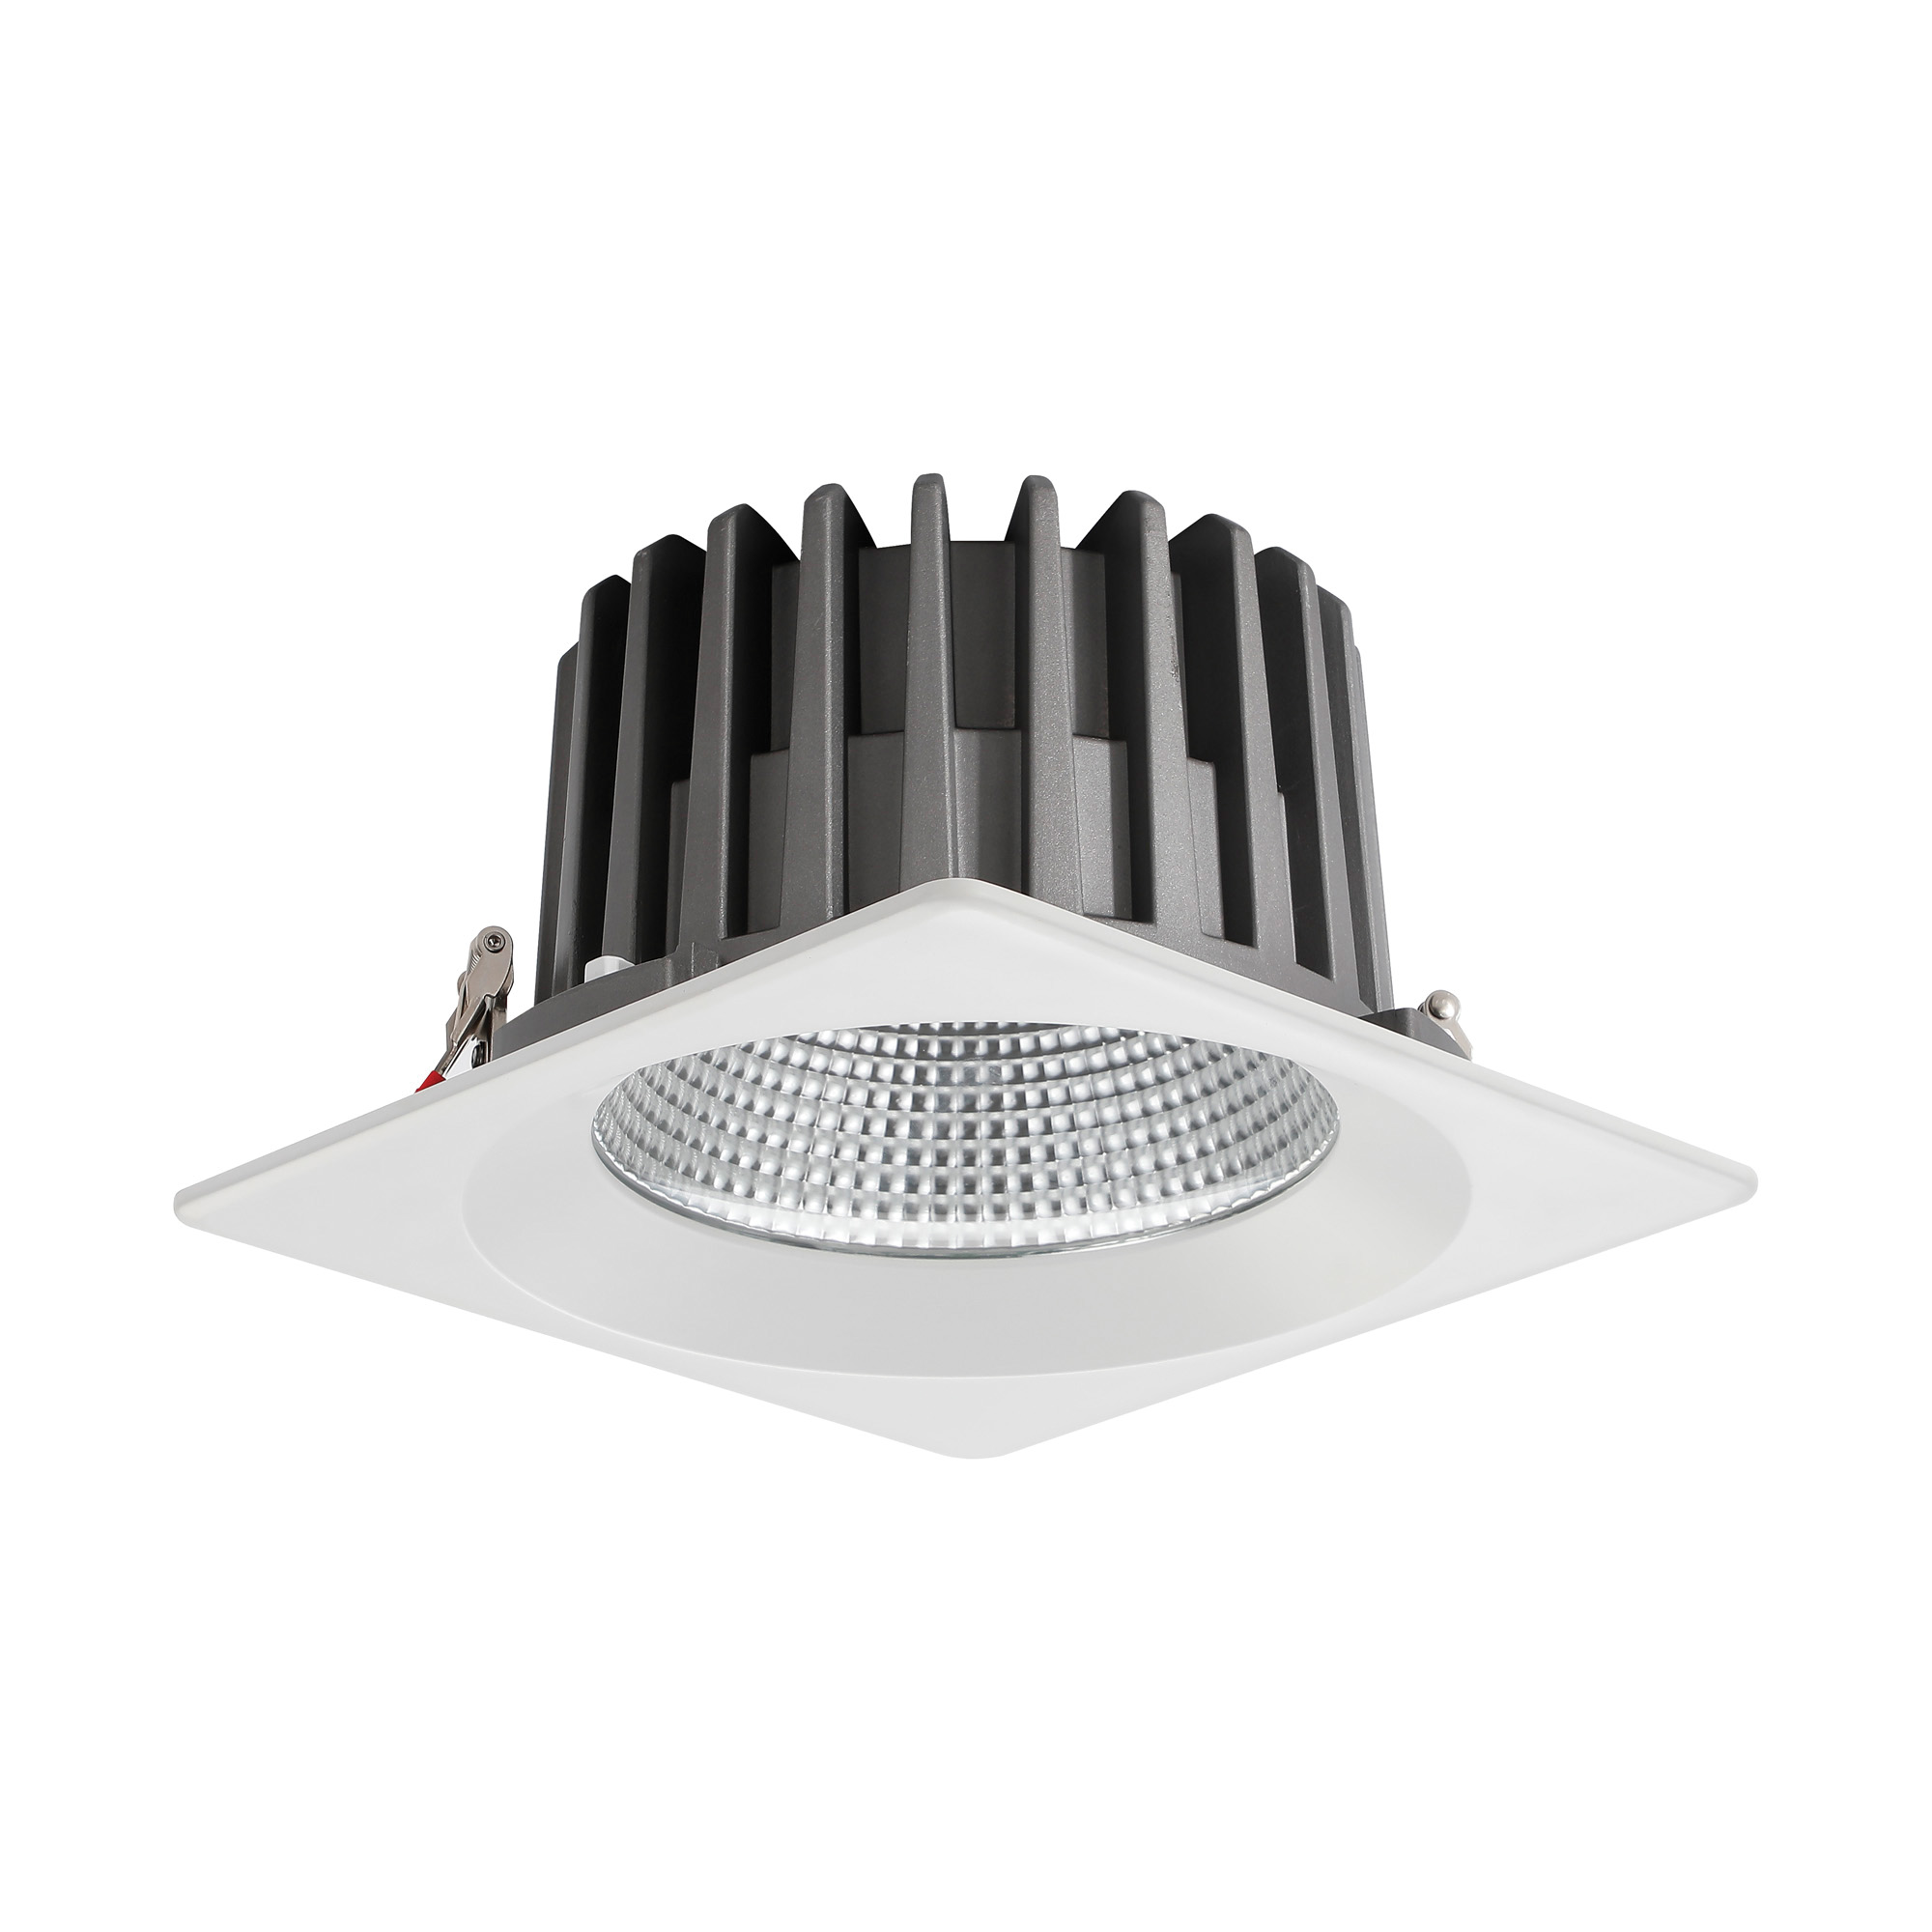 DL200082  Bionic 50, 50W, 1200mA, White Deep Square Recessed Downlight, 4380lm ,Cut Out 175mm, 50° , 3000K, IP44, DRIVER INC., 5yrs Warranty.